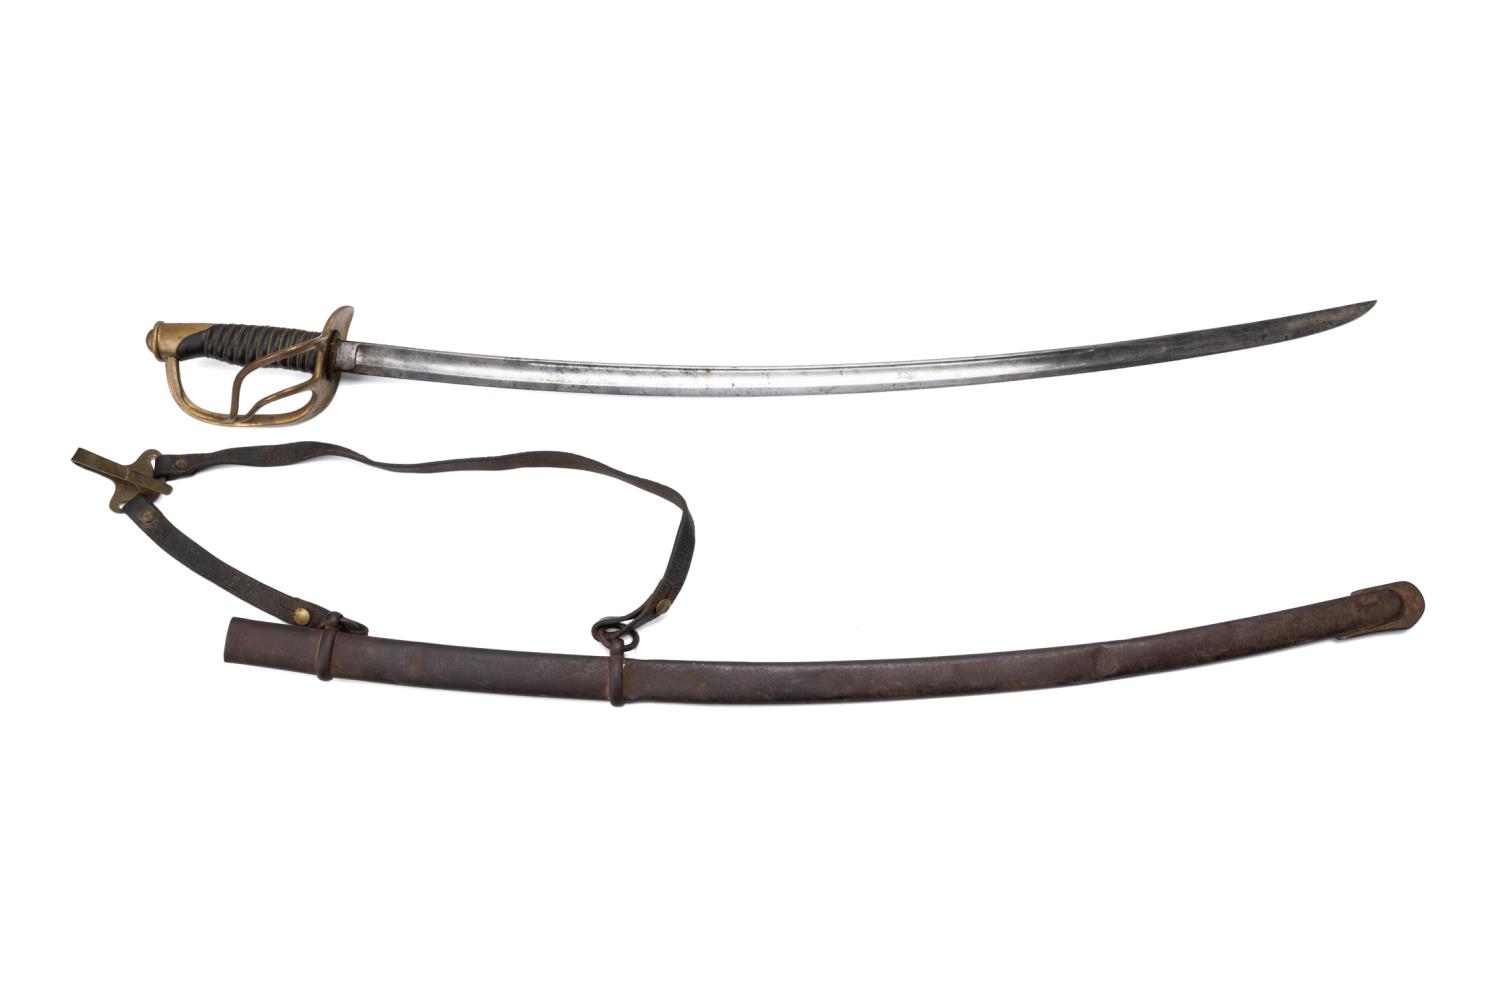 EMERSON AND SILVER M1860 US CAVALRY